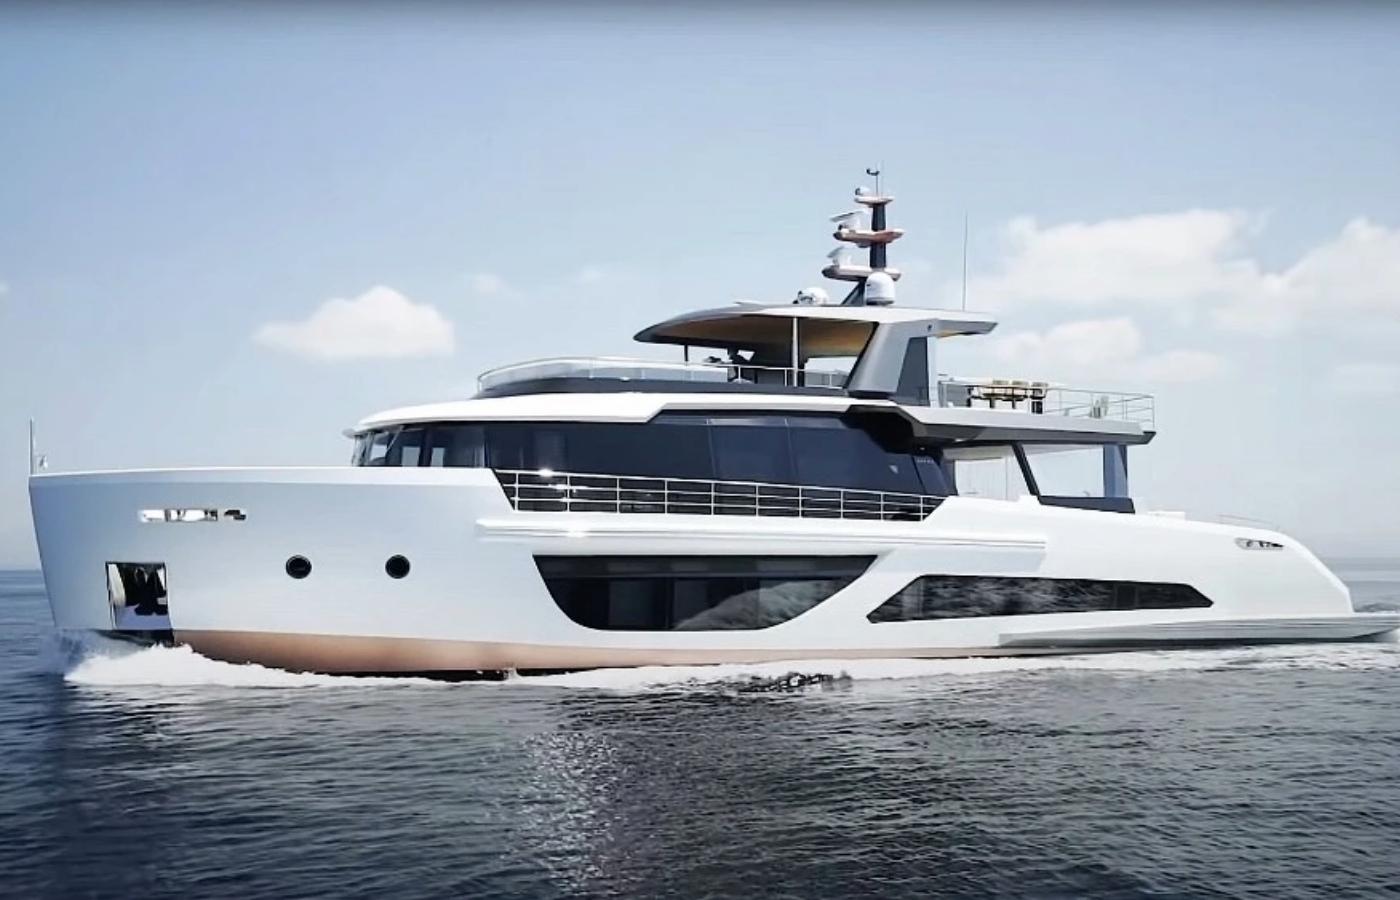 Boat of the Week: Meet ‘Vivace,’ a 102-Foot Superyacht Perfect for Cruising the Bahamas [In the News]